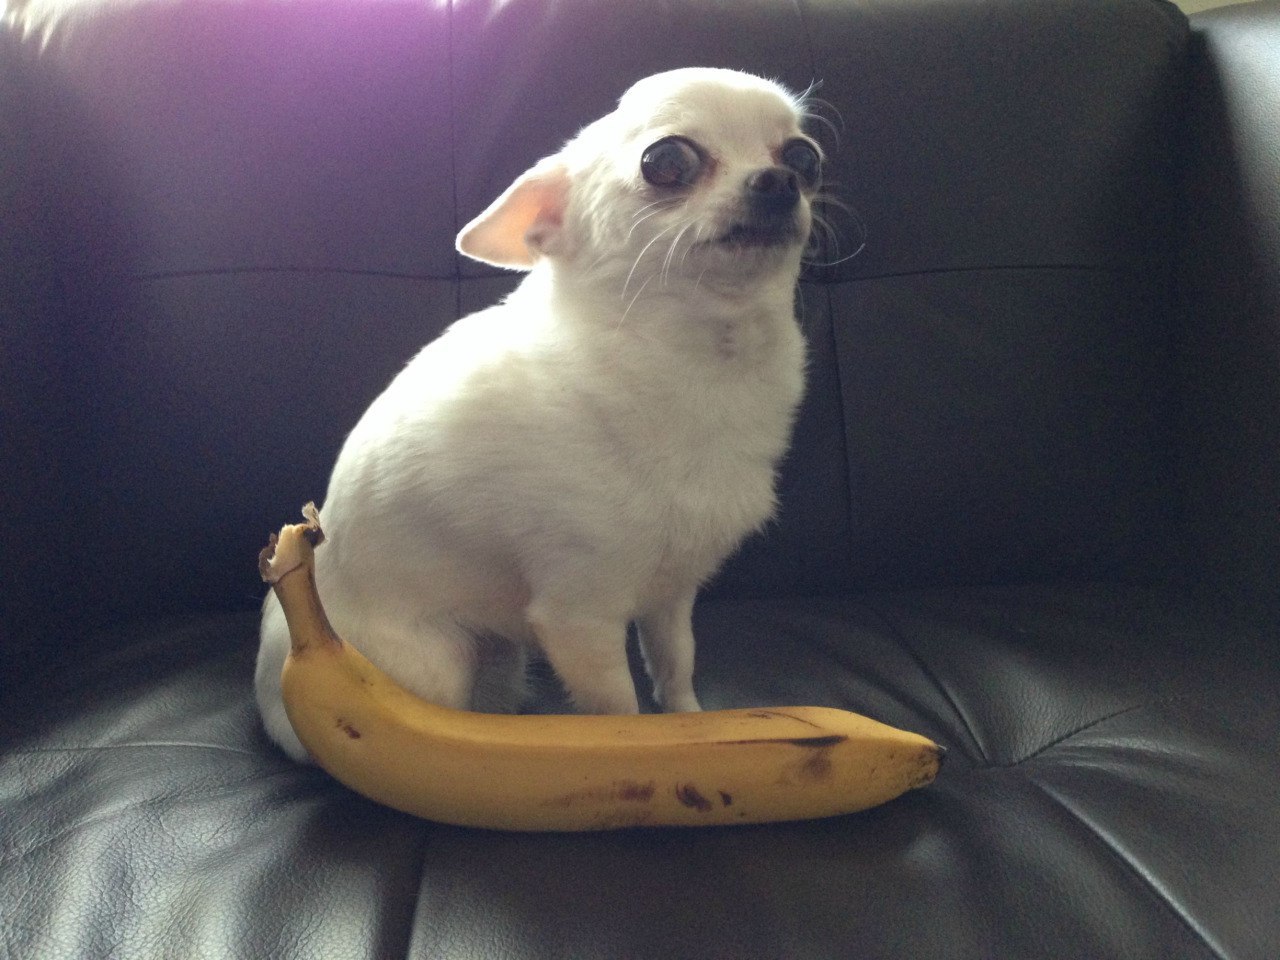 What the hell is this, man?! - Dog, Banana, Bewilderment, Chihuahua